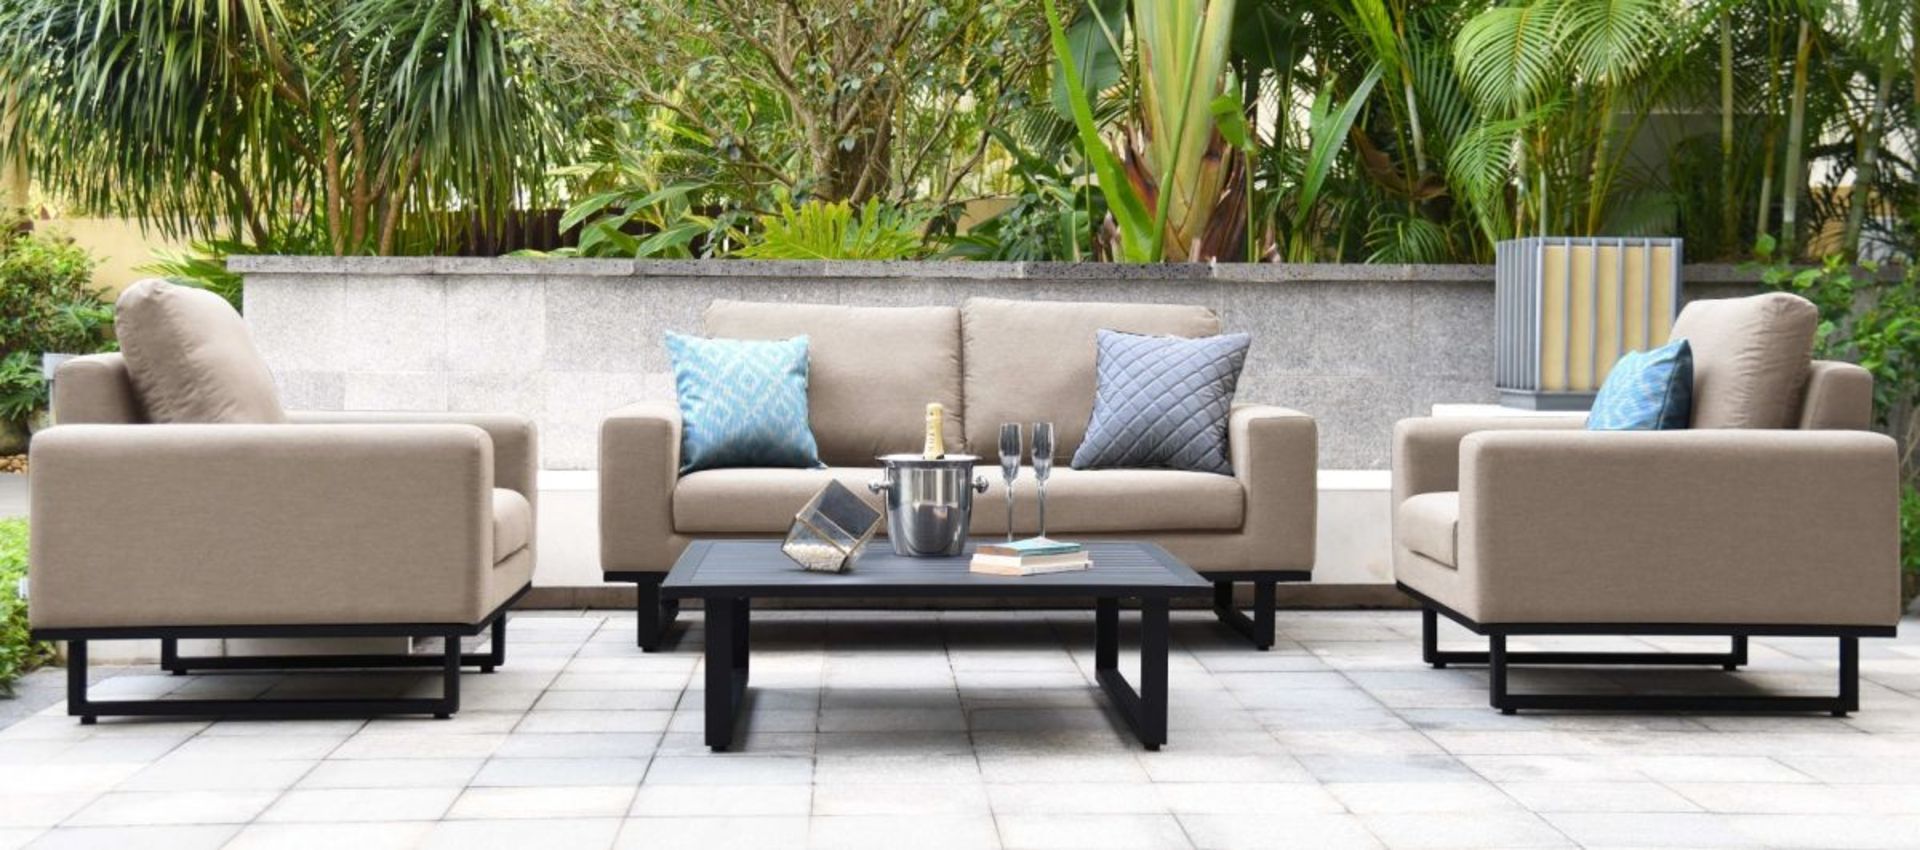 Ethos Outdoor 2 Seat Sofa Set With Coffee Table (Taupe) *BRAND NEW*